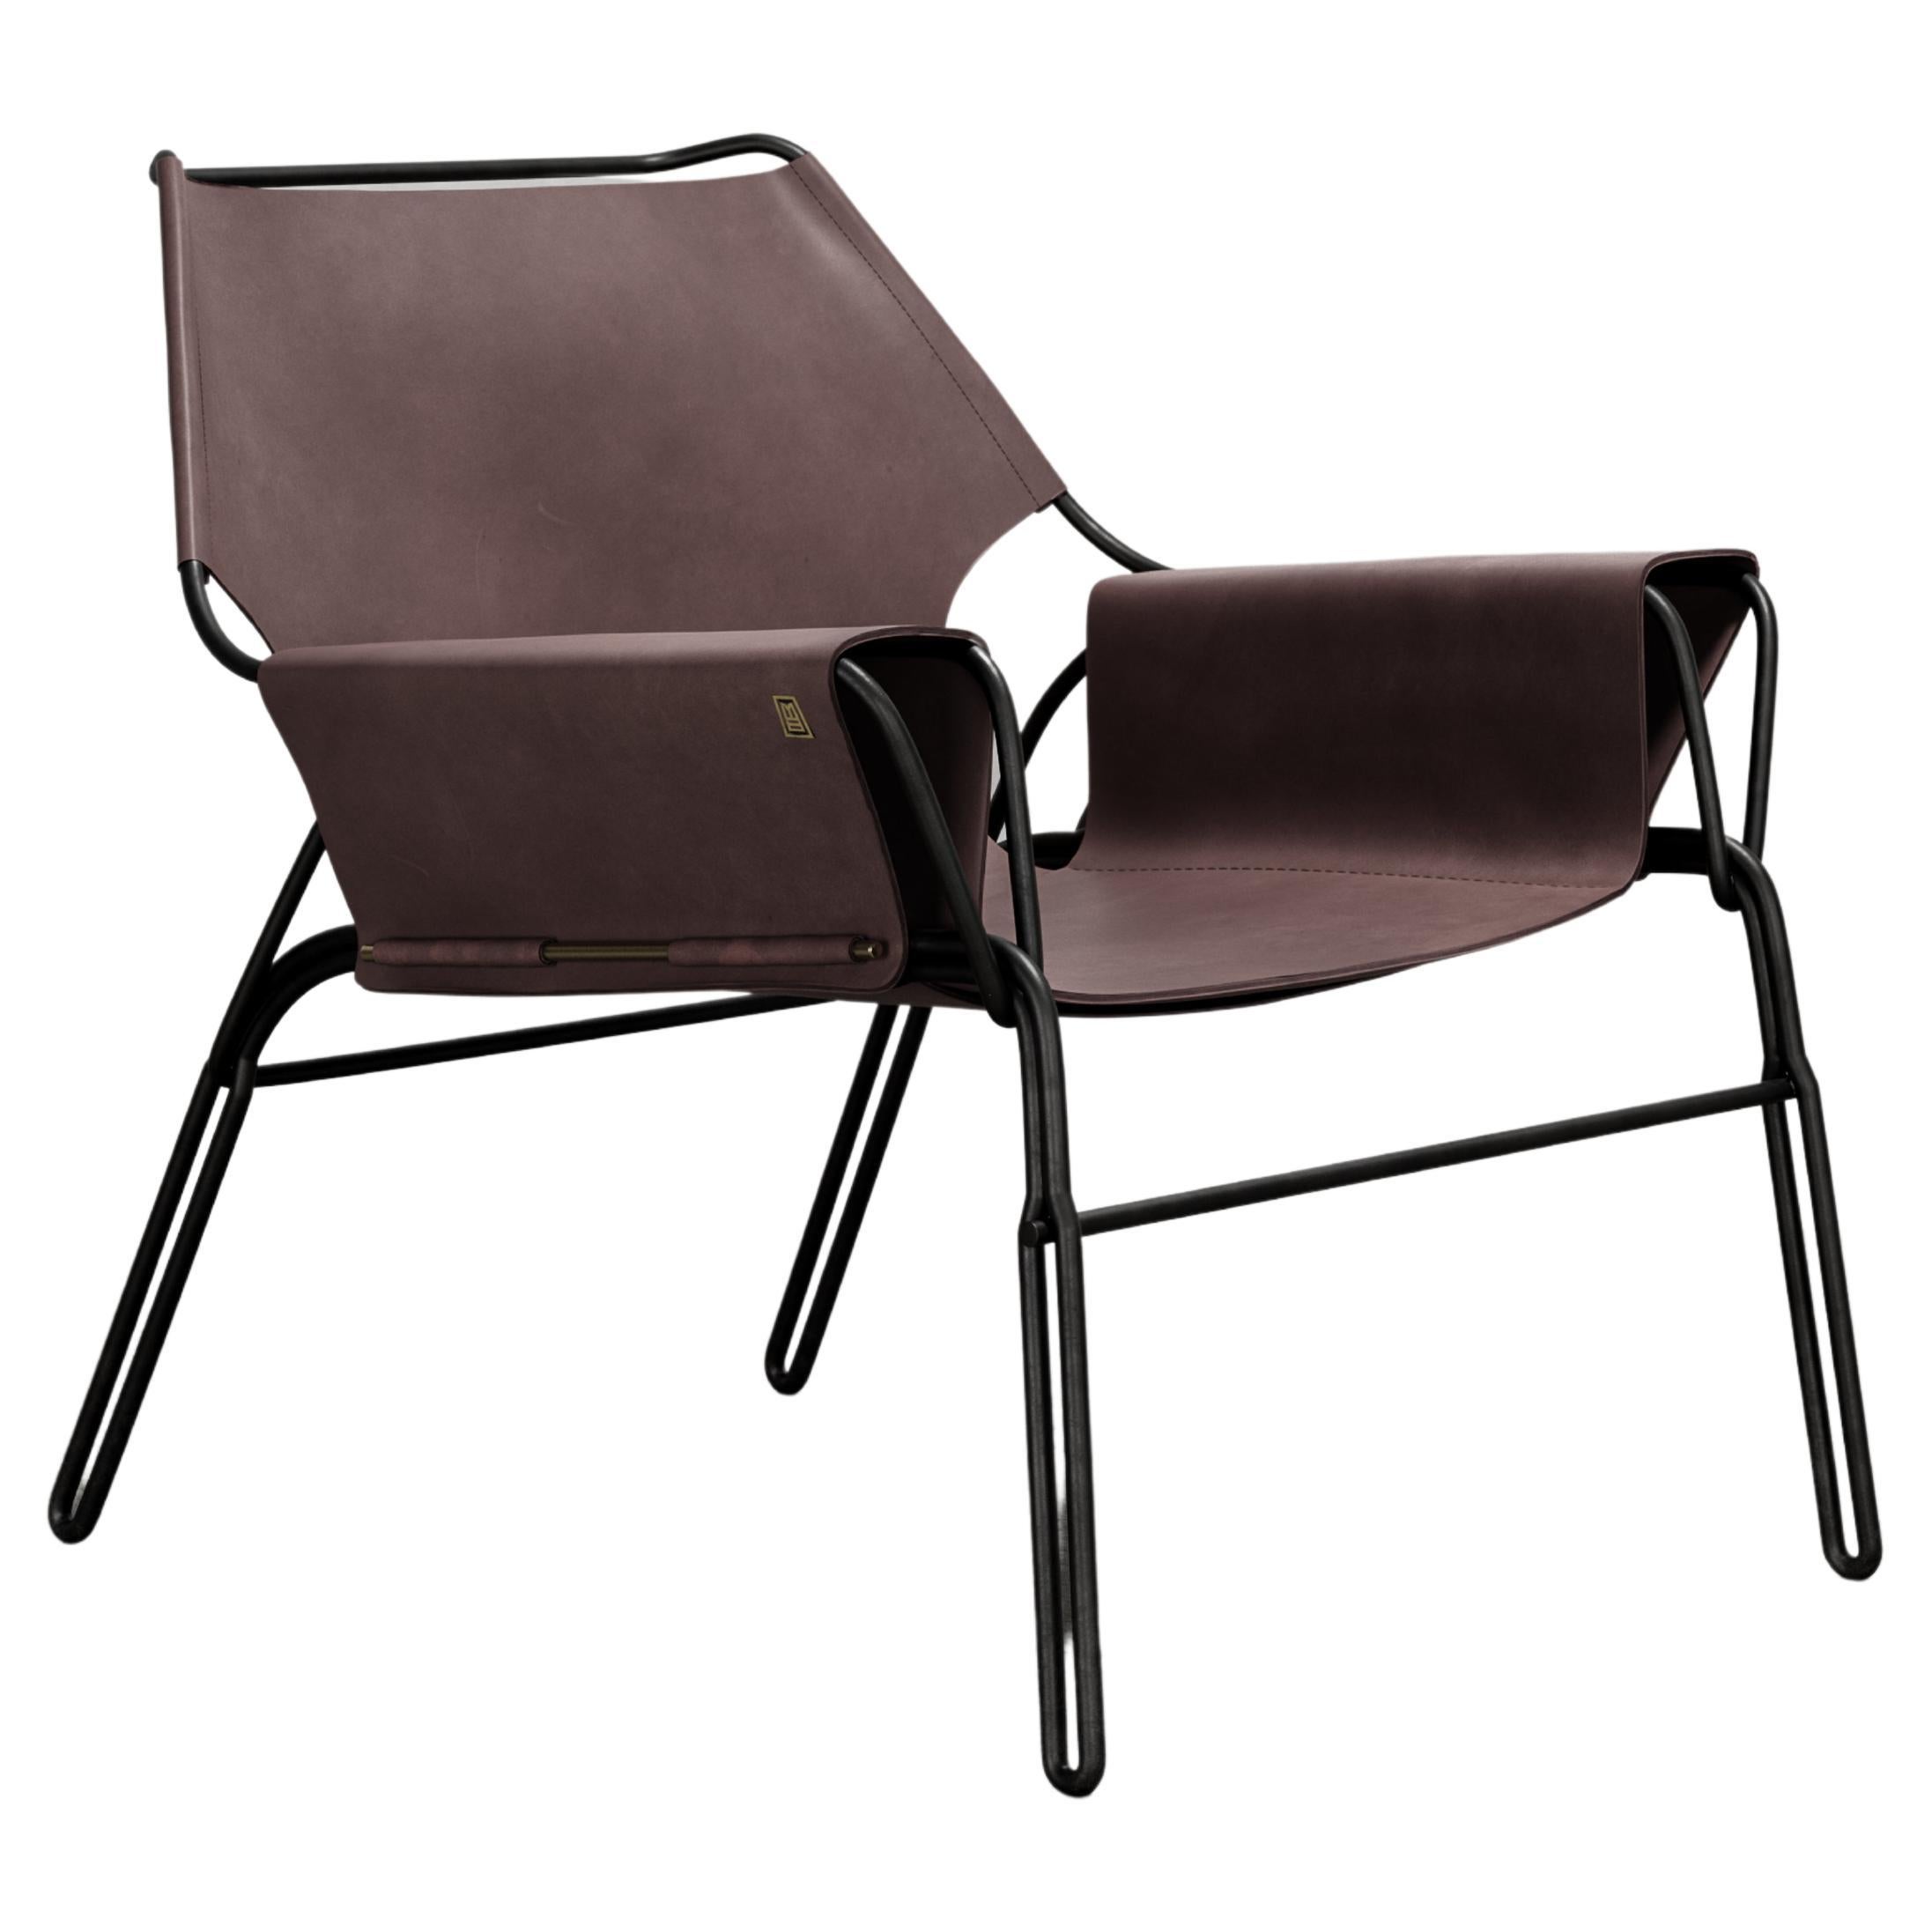 PERFIDIA_02 Cognac Thick Leather Sling Lounge Chair in Black Steel by ANDEAN